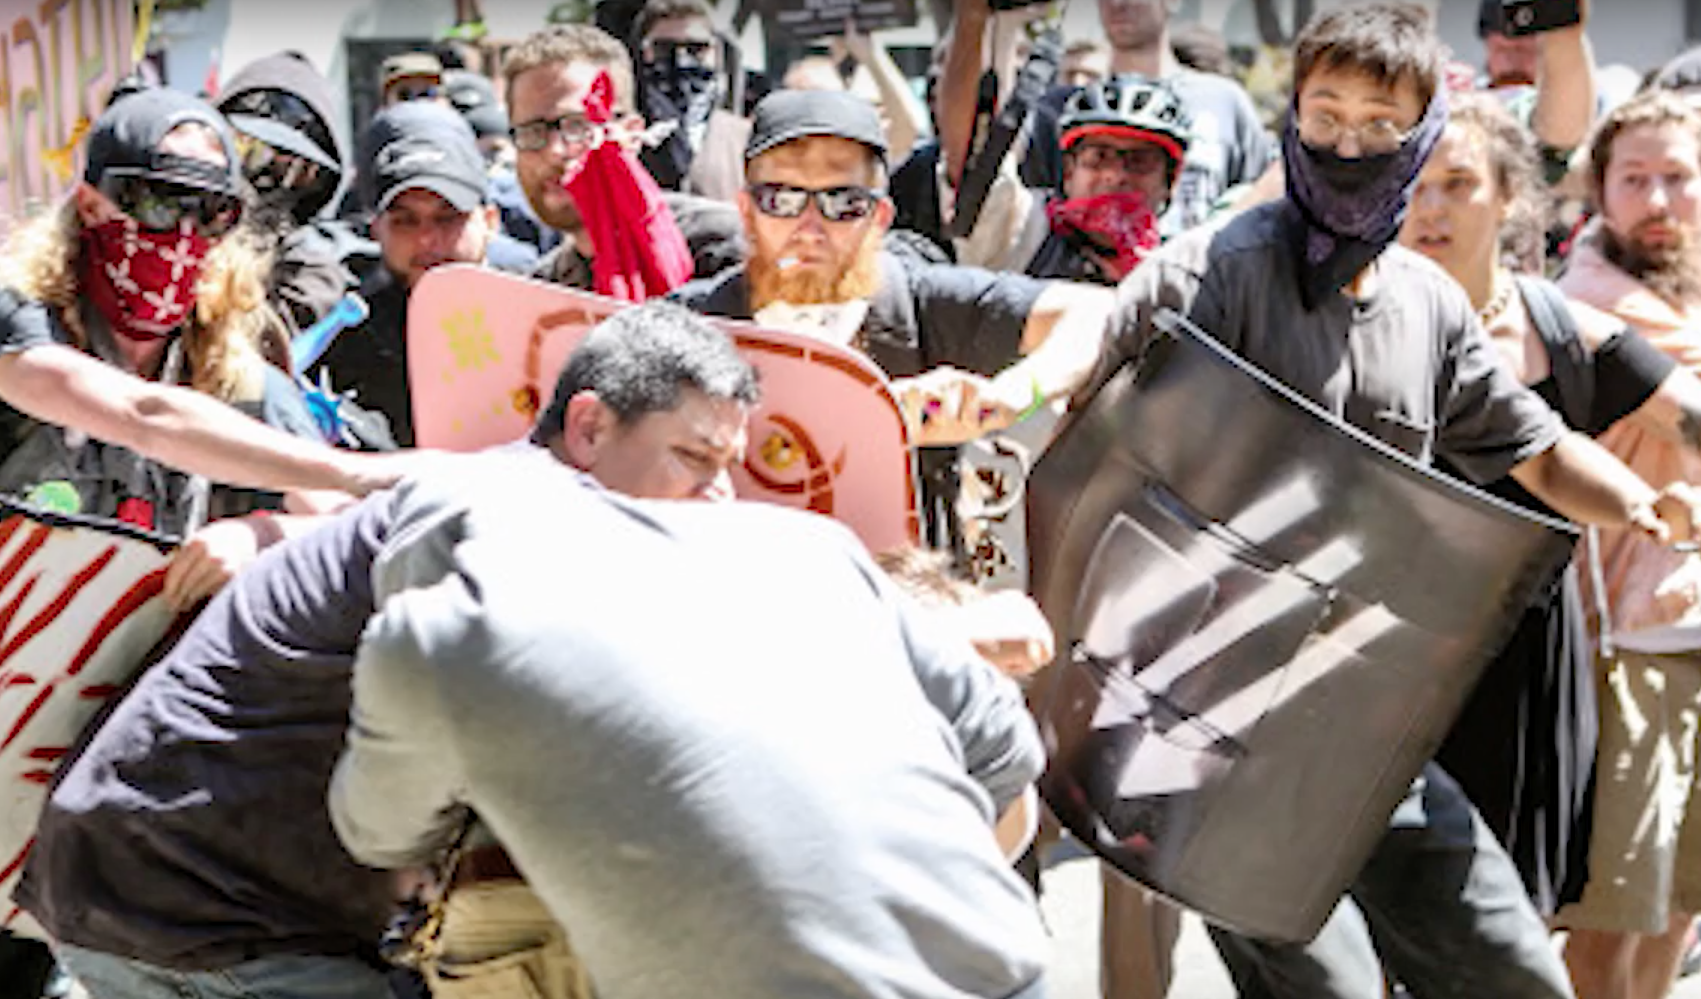 Antifa combatants fighting with Trump supporters at Berkeley, California on August 27. 2017.